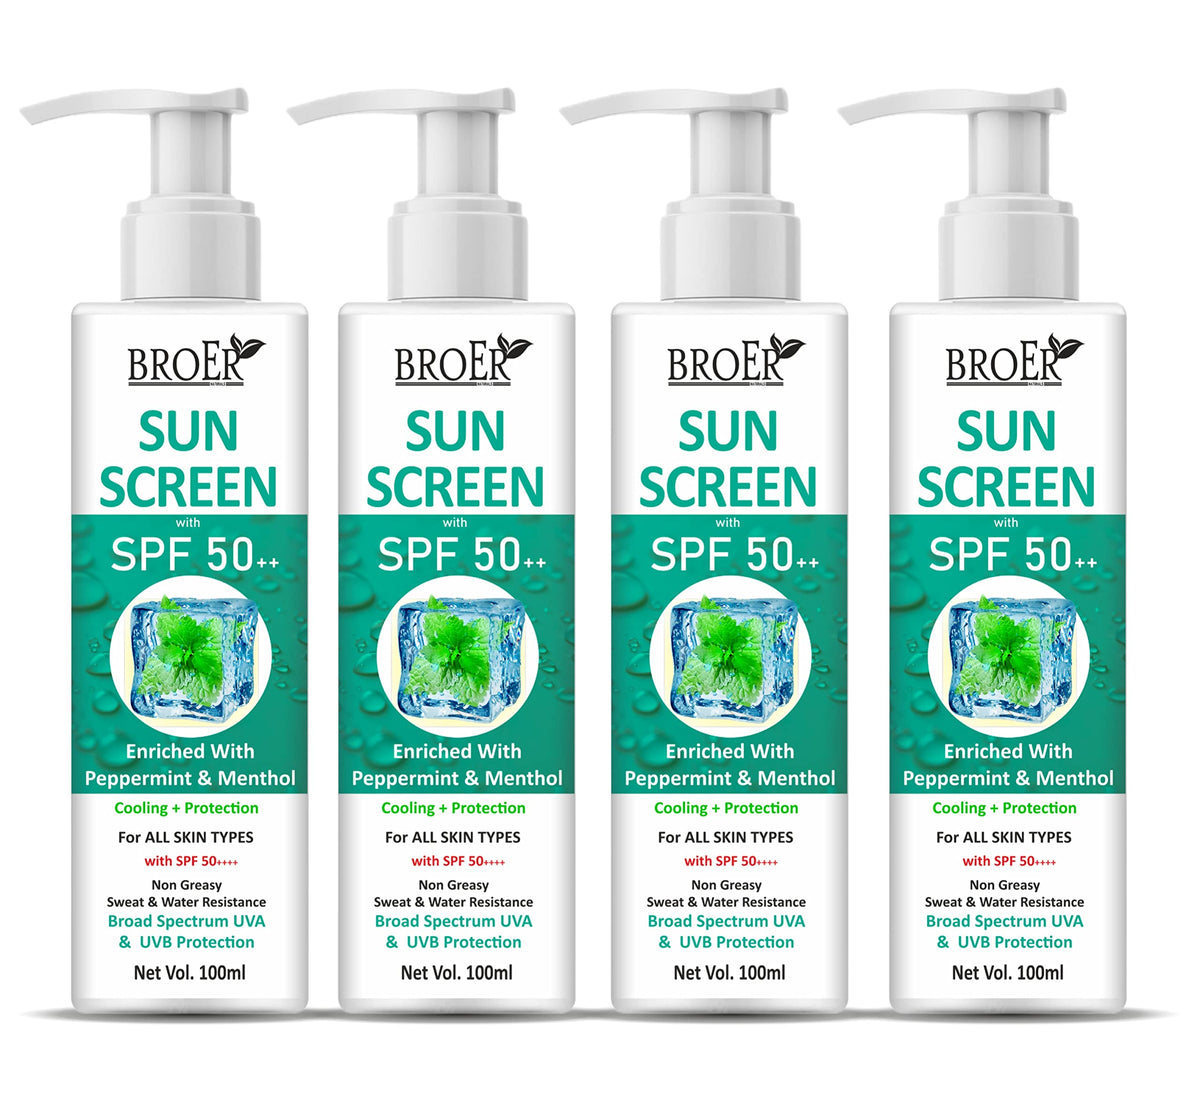 BROER Sunscreen Lotion With SPF 50 & Menthol | Instant Freshness + Protection For All Day | Cool Sunscreen Lotion | With Uva & Uvb Protection | Sunscreen SPF 50 | Moisturizer - (pack of 4) 400ml